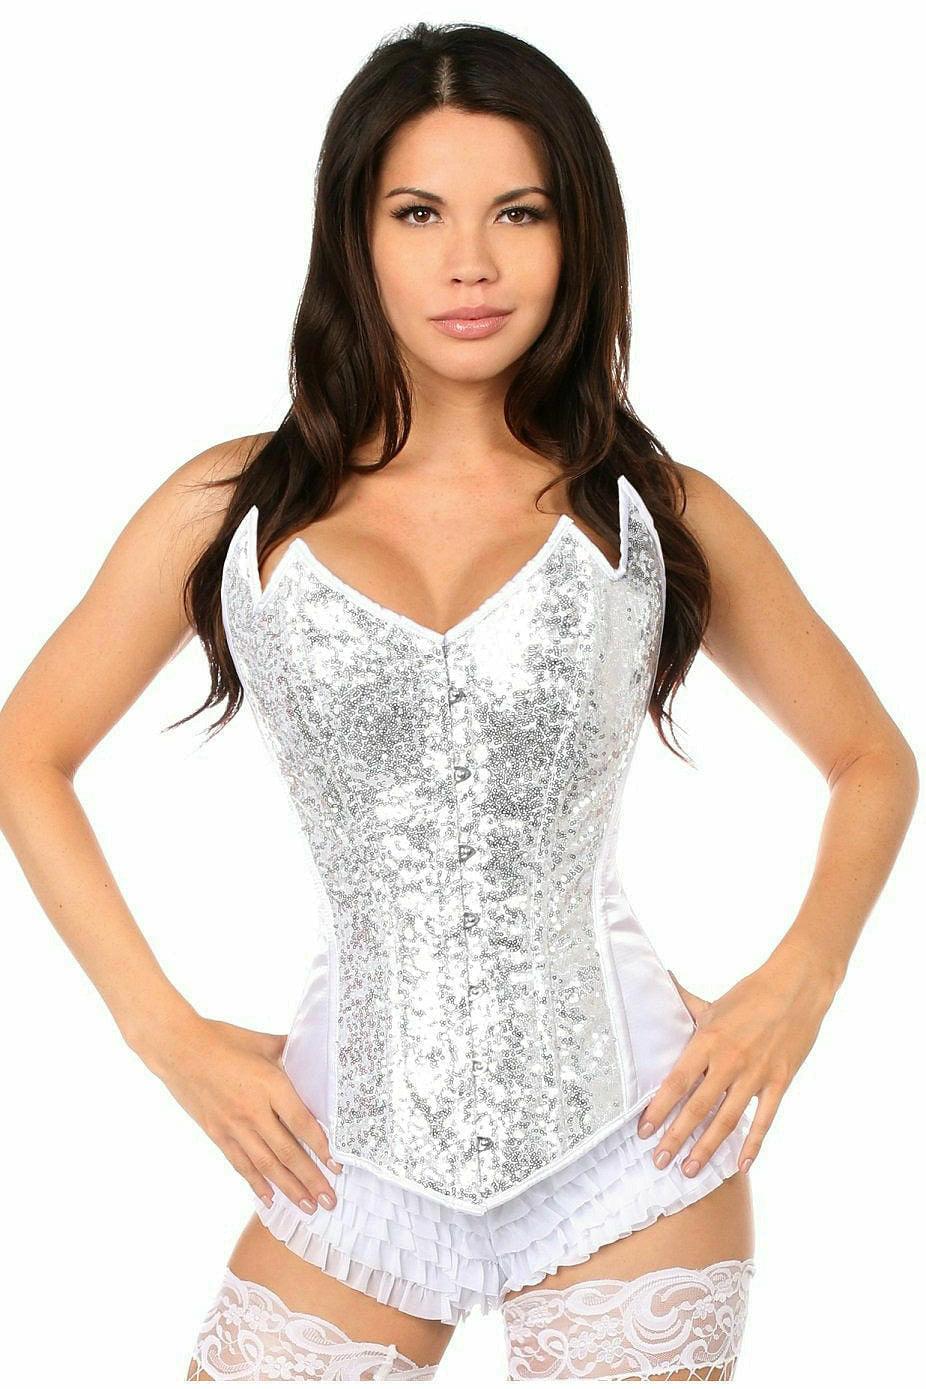 Top Drawer White/Silver Sequin Pointed Top Steel Boned Corset - AMIClubwear